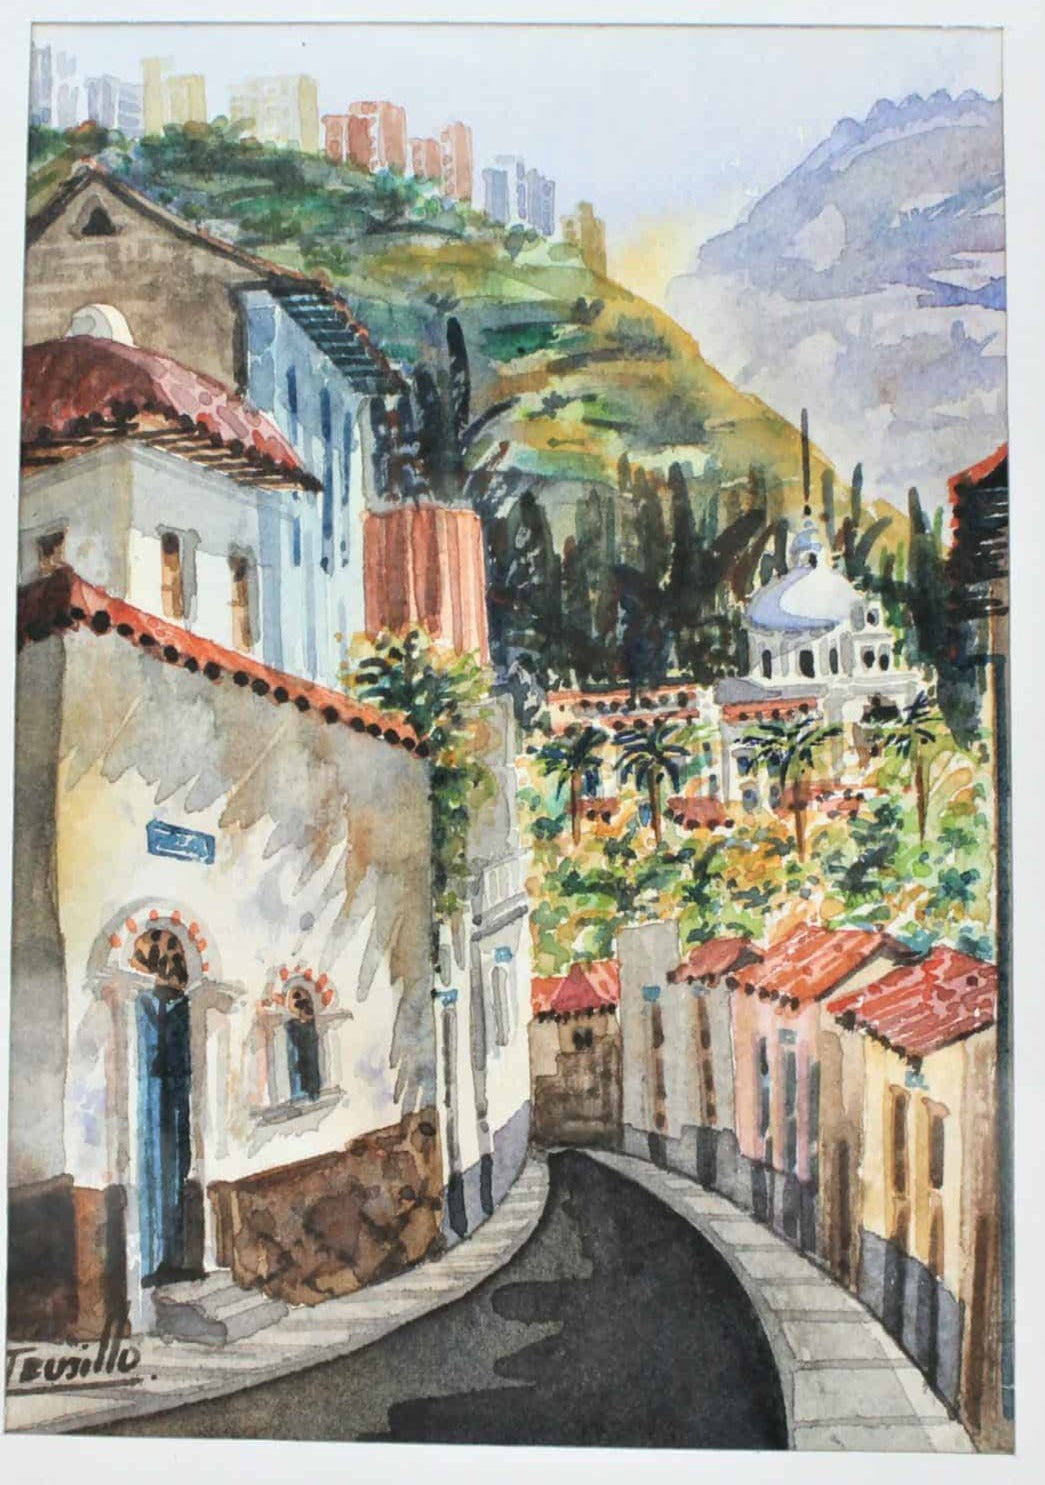 Painting Watercolor, Trujillo, Old Town #1, Signed by Artist, Framed, Vintage